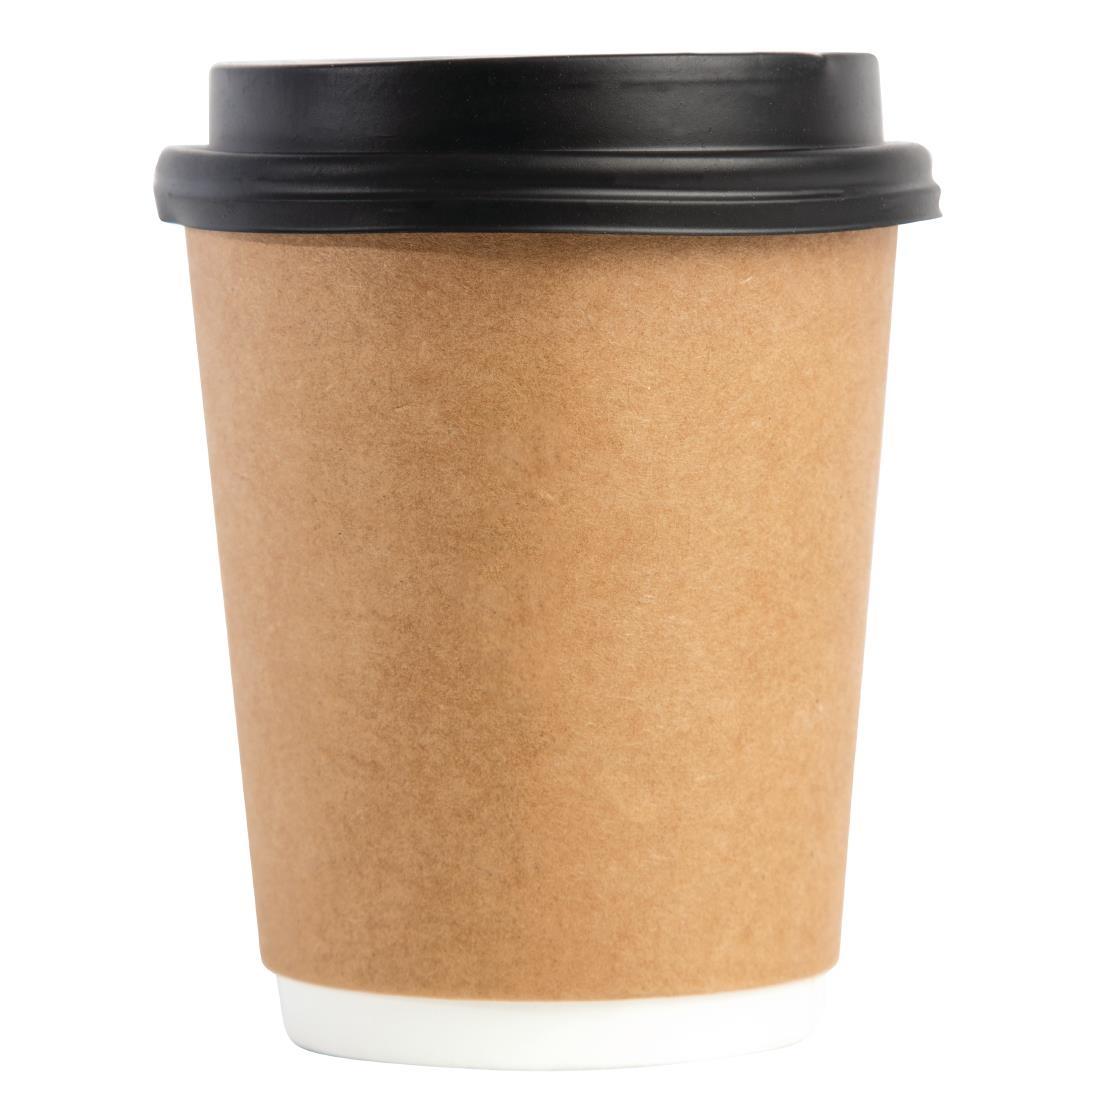 Fiesta Recyclable Coffee Cup Lids Black 225ml / 8oz (Pack of 50) - CW715  - 6